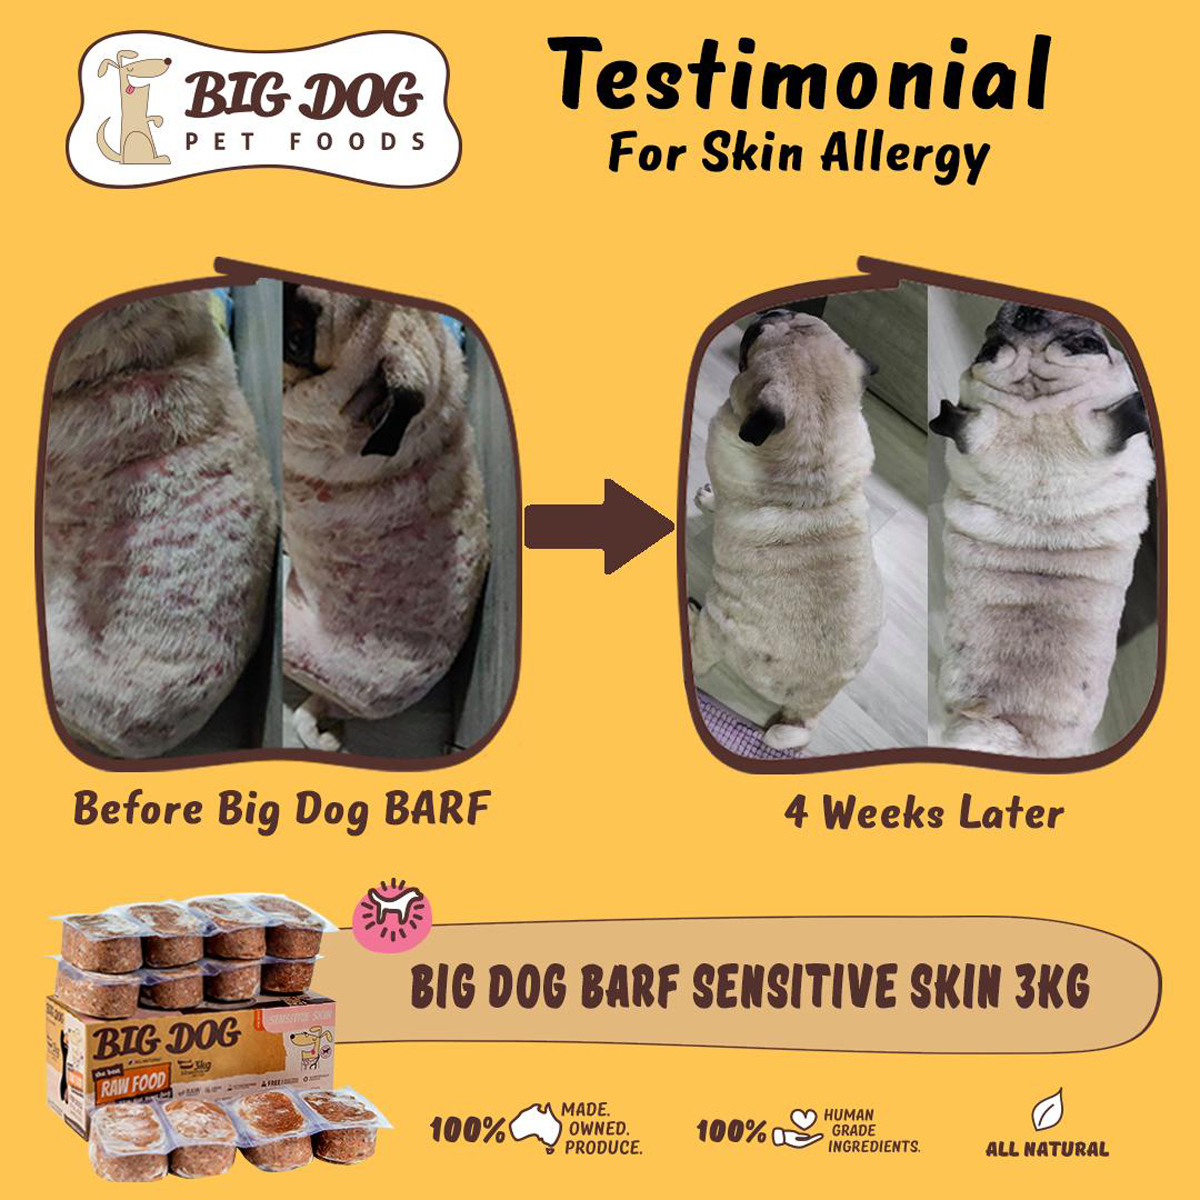 Big Dog Pet Food The Secret To Your Pet’s Glowing Health